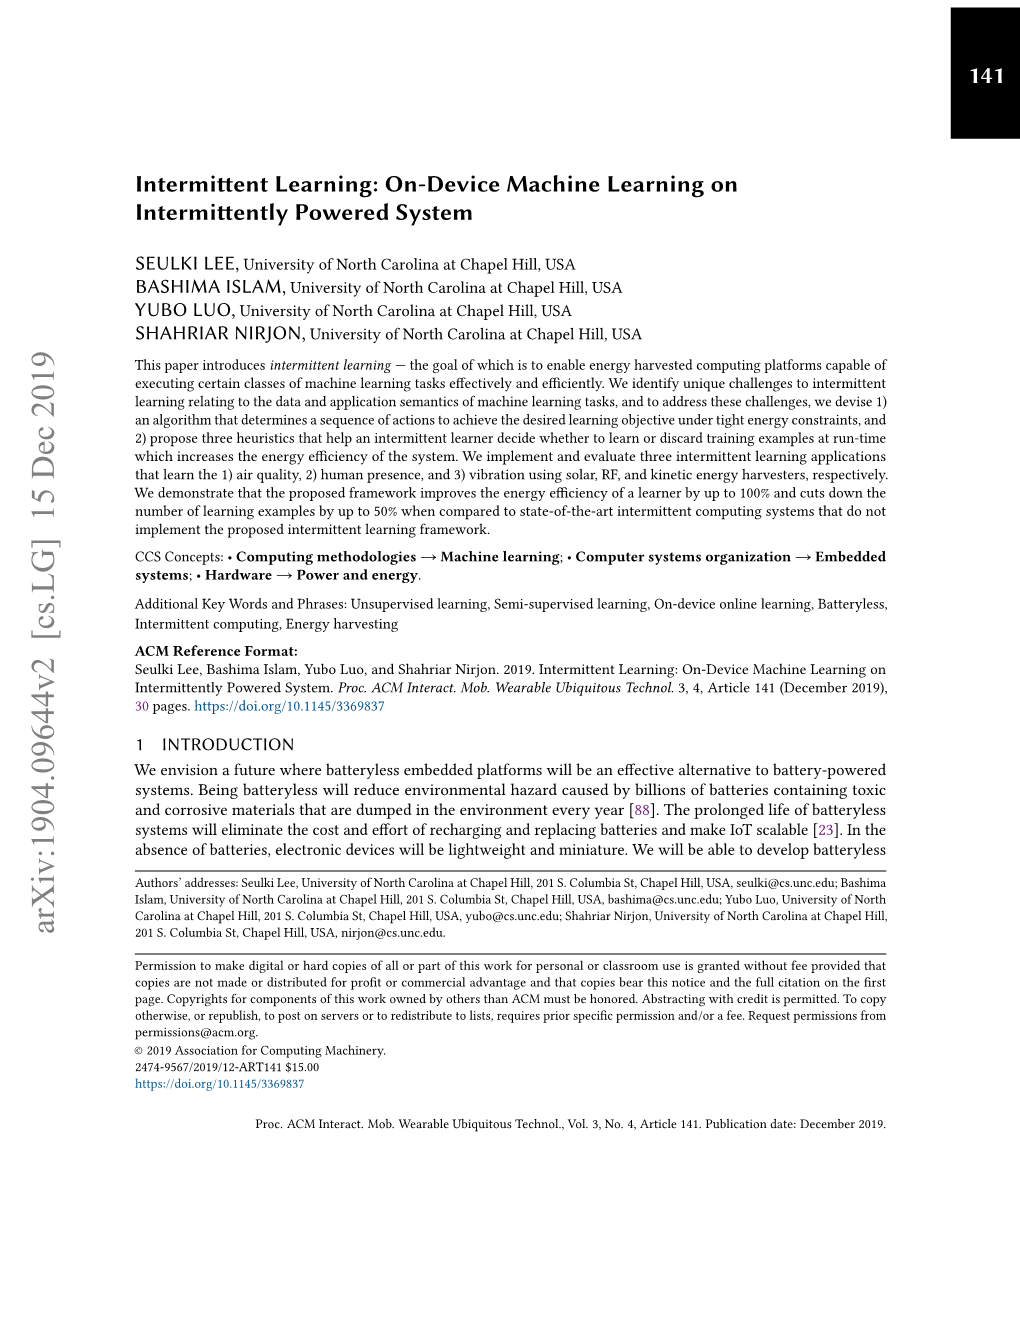 On-Device Machine Learning on Intermittently Powered System